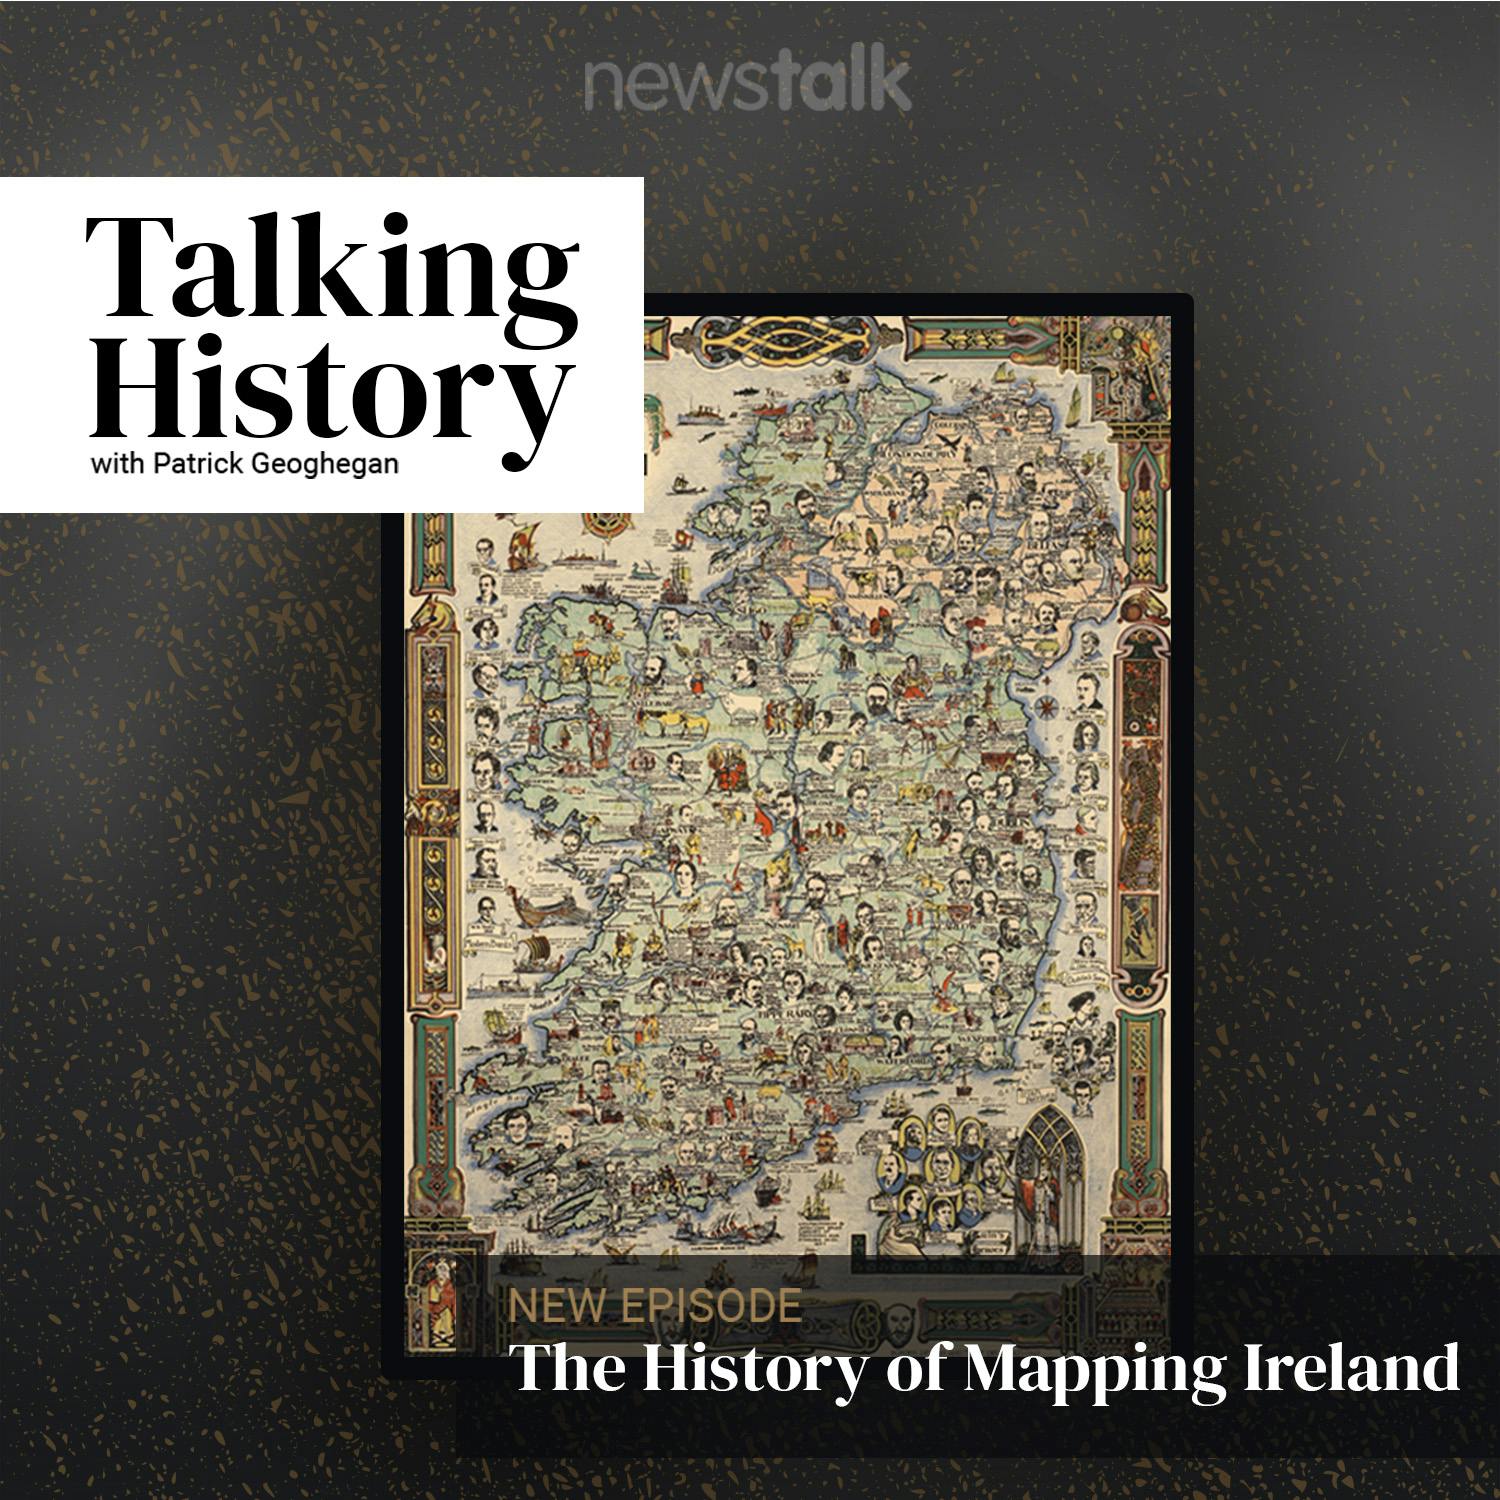 Pioneering Dublin Women and The History of Mapping Ireland